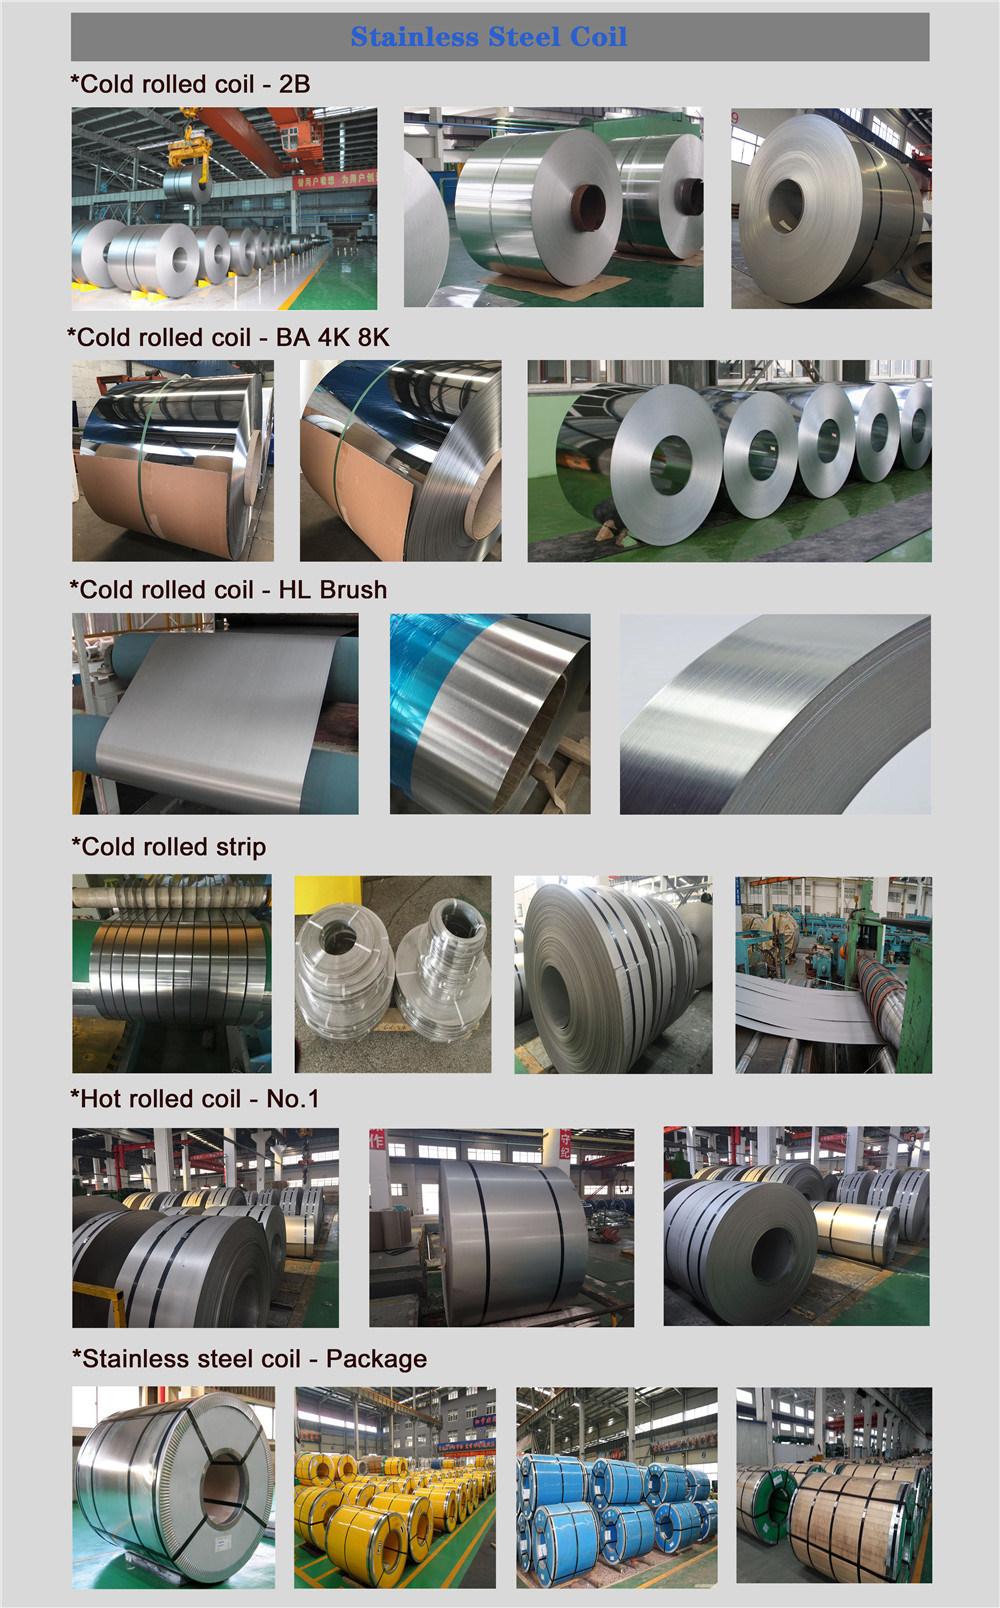 Good Price Hot Rolled SUS 304 Stainless Steel Plate No. 1 Finish 316 Stainless Steel Sheet